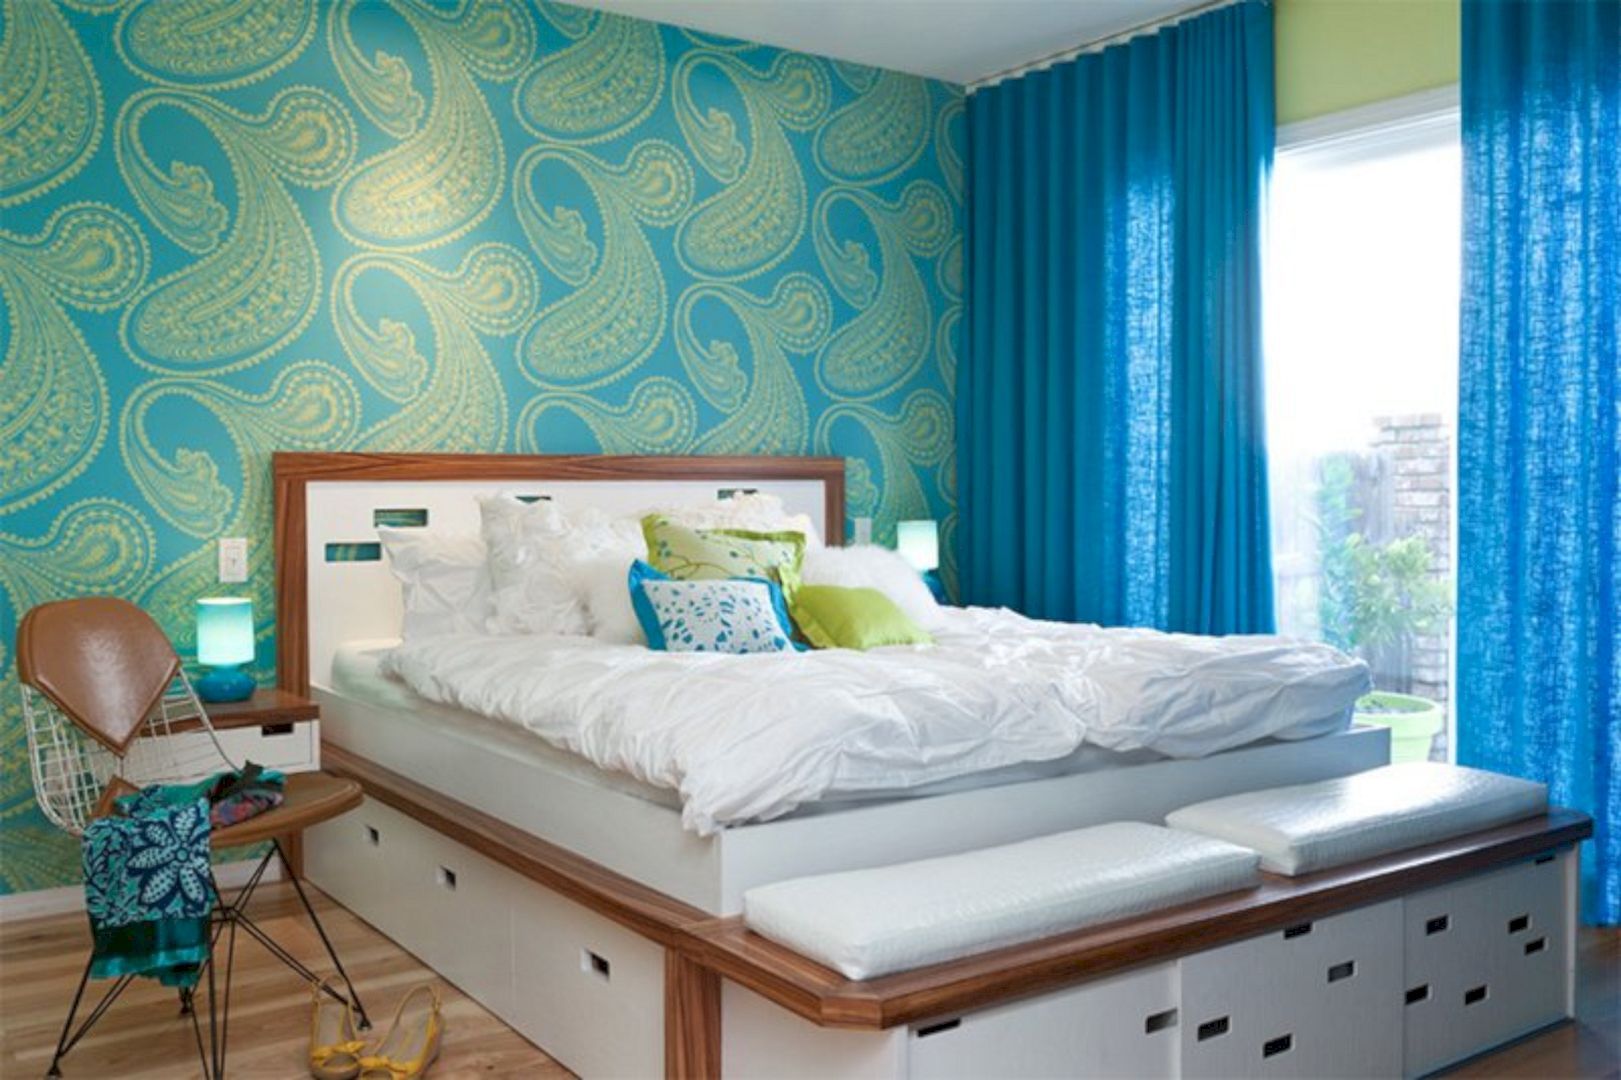 Decor of a bedroom wall-paper from a nonwoven